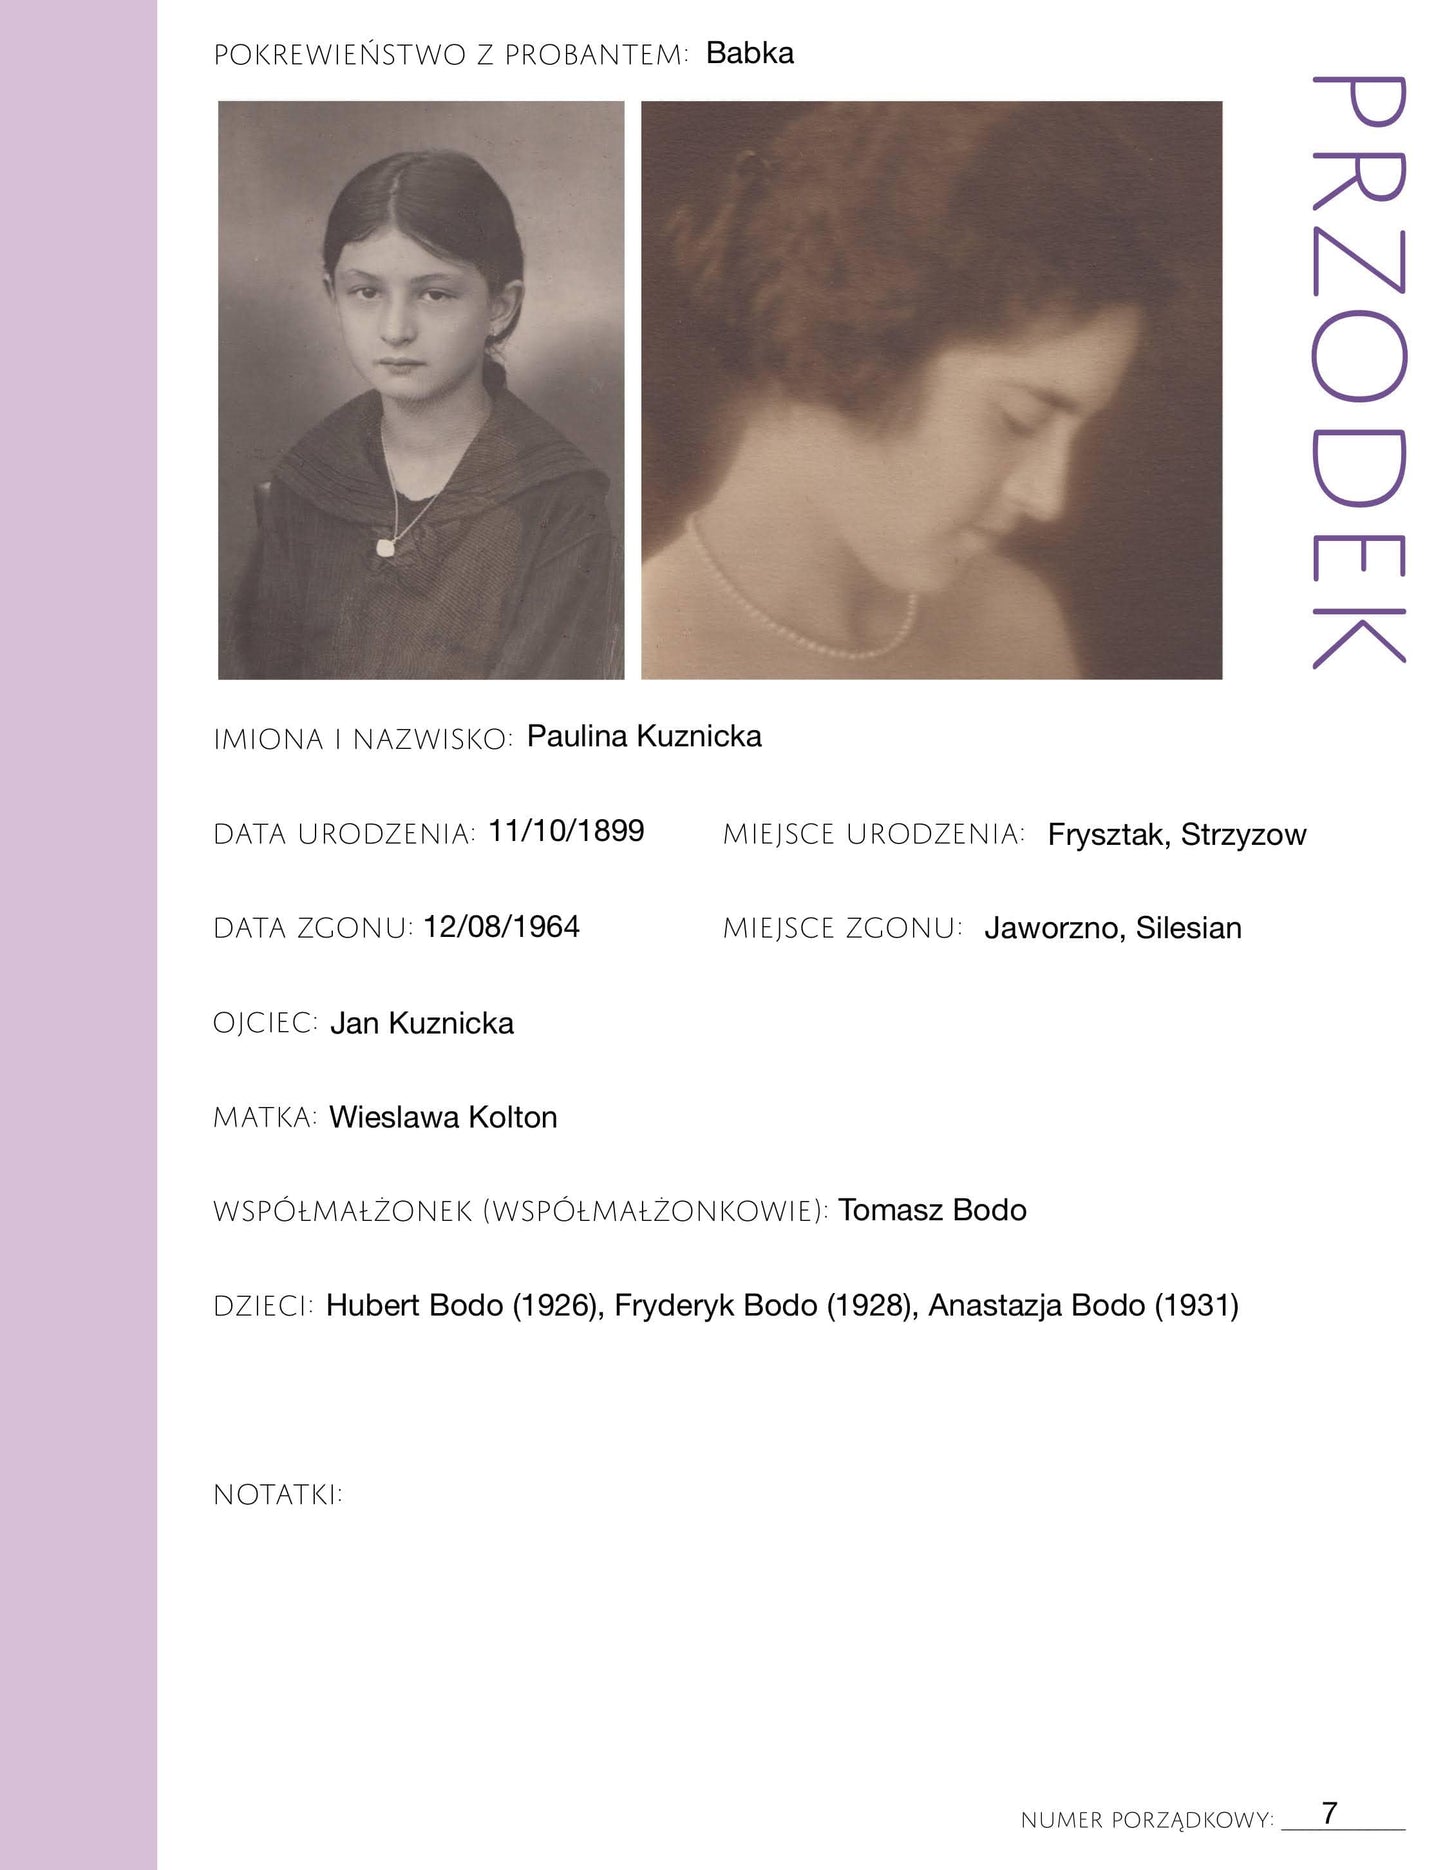 Deluxe Genealogy Pages in Polish /// 200-Page Family History Bundle - Thistle (Digital Download)